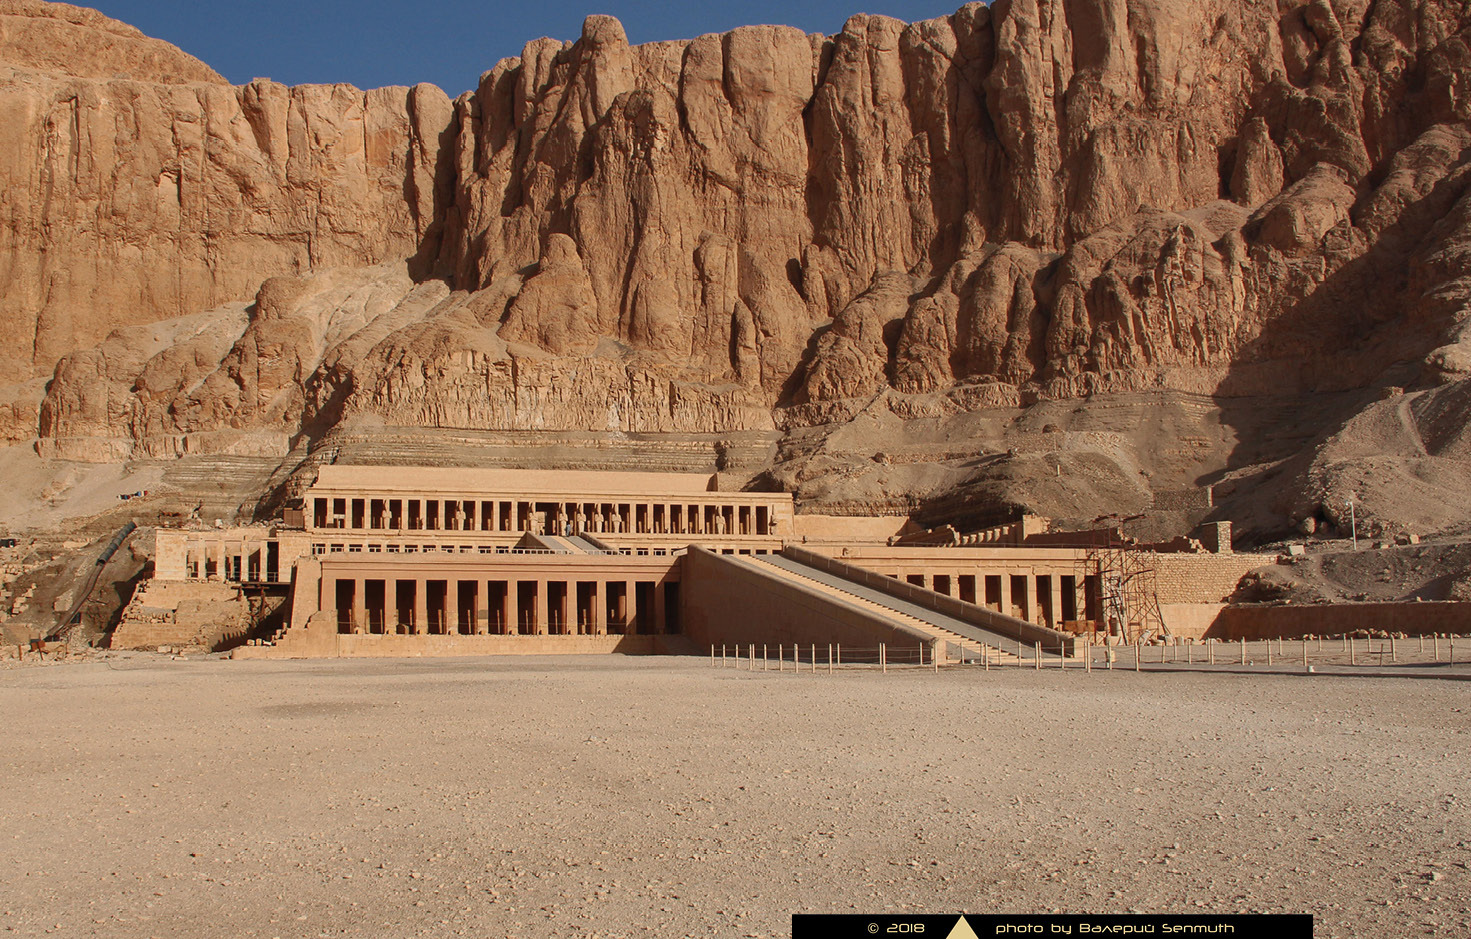 Not the easiest way to the temple of Queen Hatshepsut - My, Ancient Egypt, Hatshepsut, Temple, Pharaoh, Mummy, Egyptology, Story, Archeology, Longpost